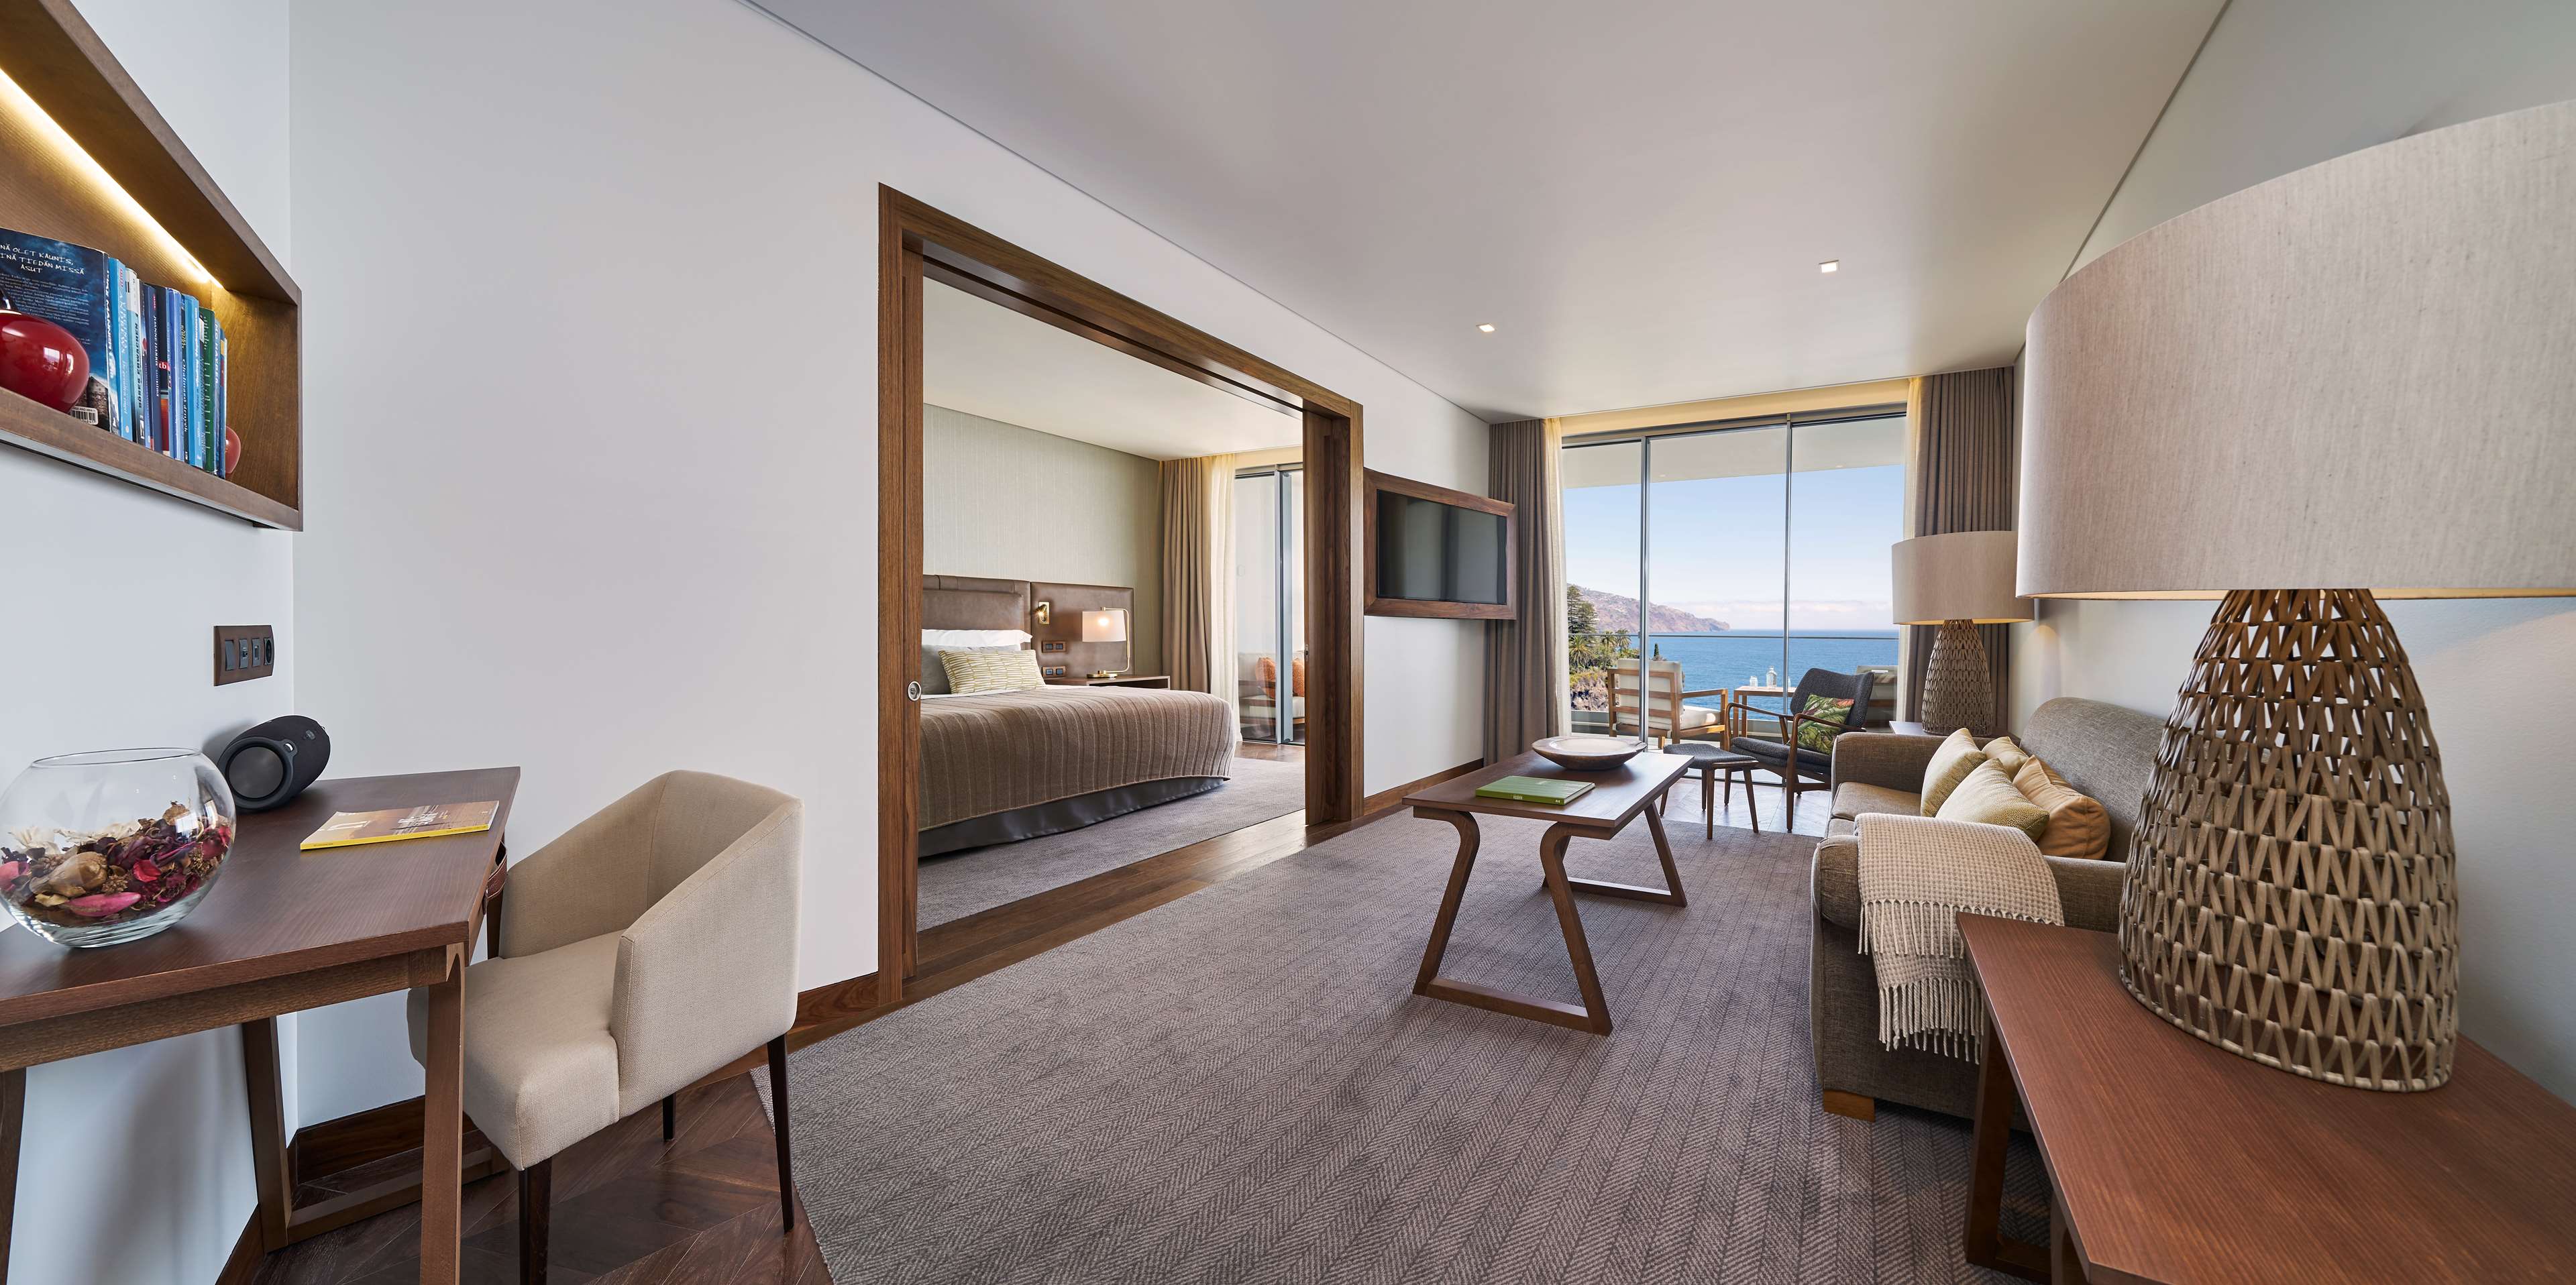 Les Suites at The Cliff Bay